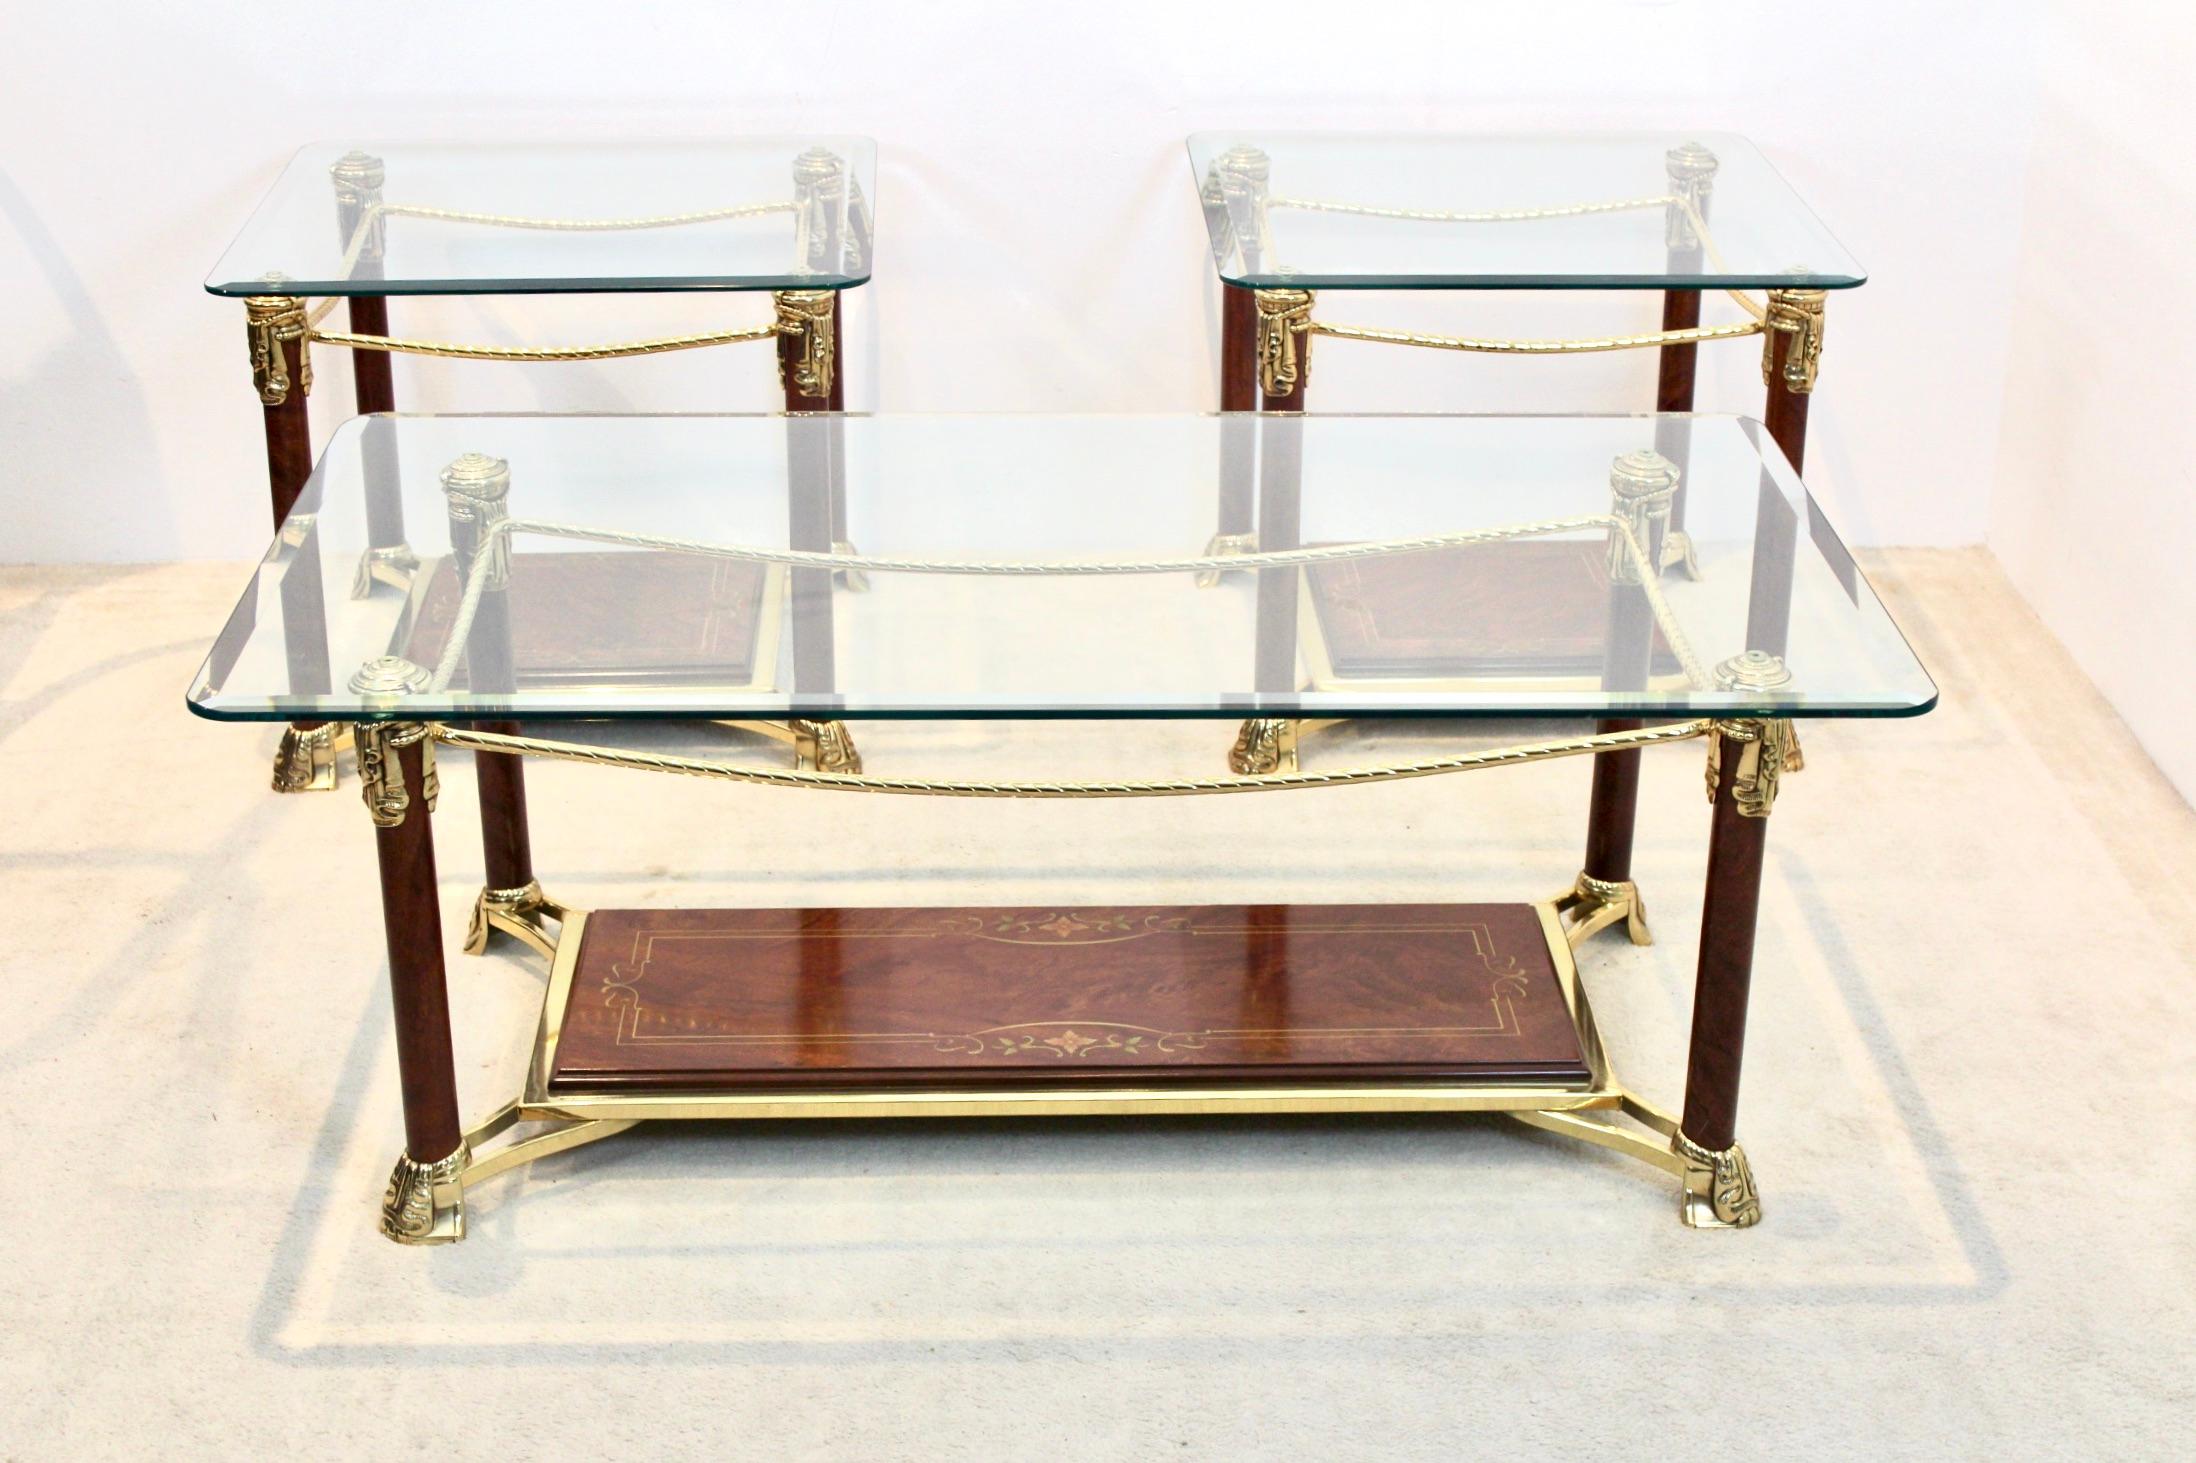 A truly beautiful set of brass and burr walnut coffee or side tables with solid glass tops. In true Hollywood Regency manner this elegant Hollywood Regency style pair have unique cut-out square and rectangular designs. Produced in France, circa